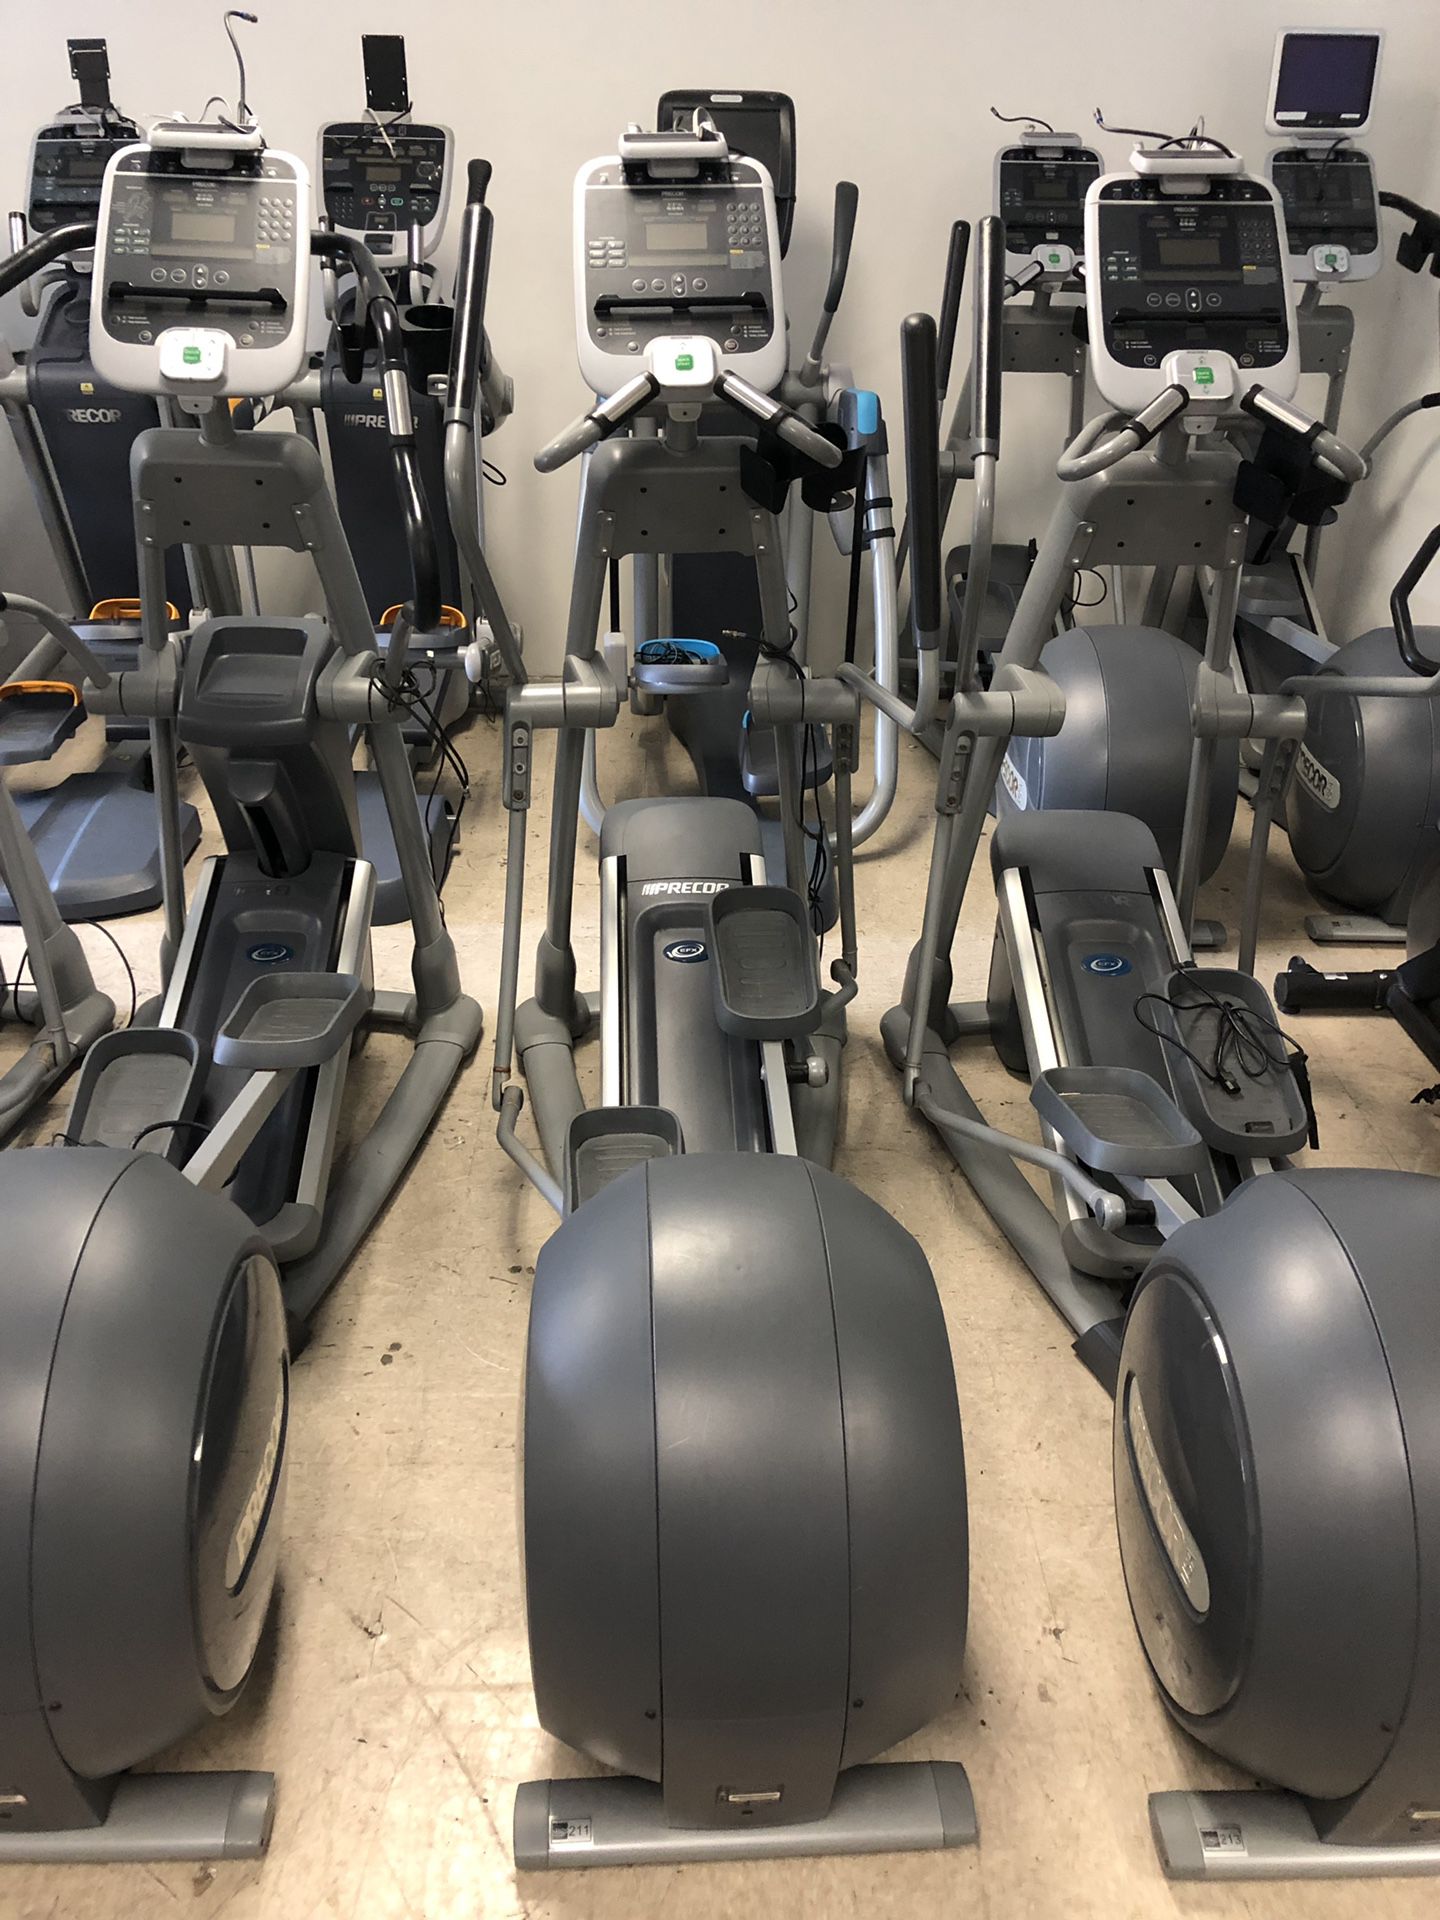 Precor c556i elliptical with moving arms